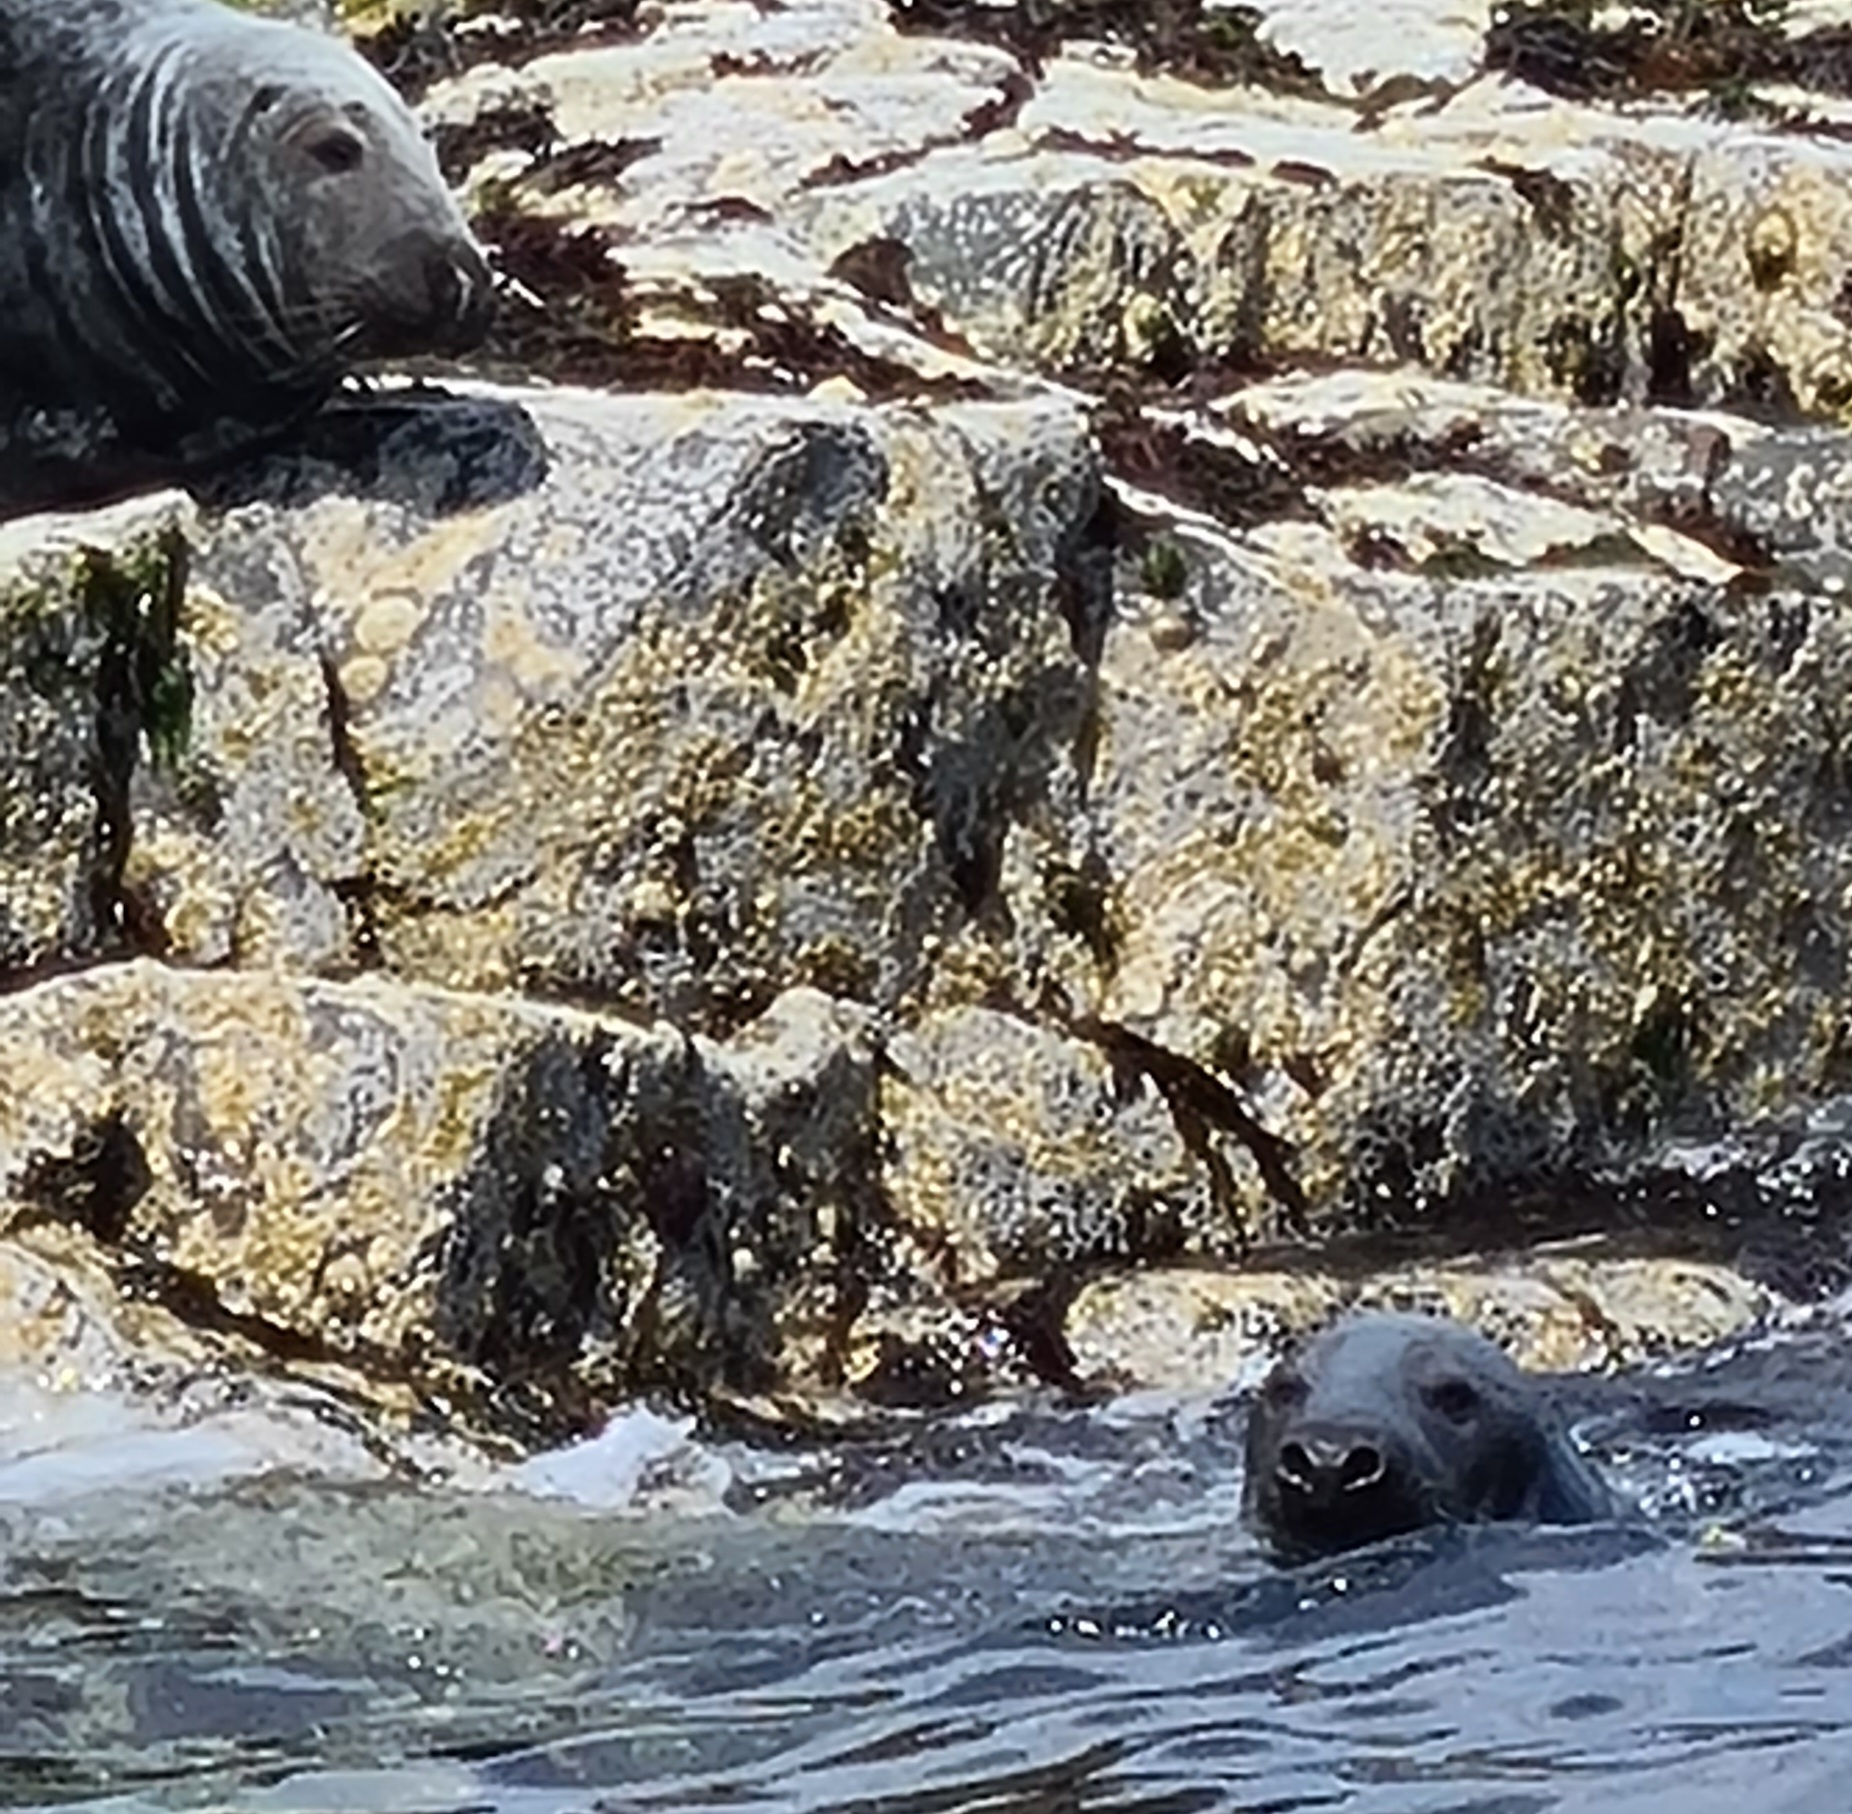 Swimming seals in the Farne islands Northumberland